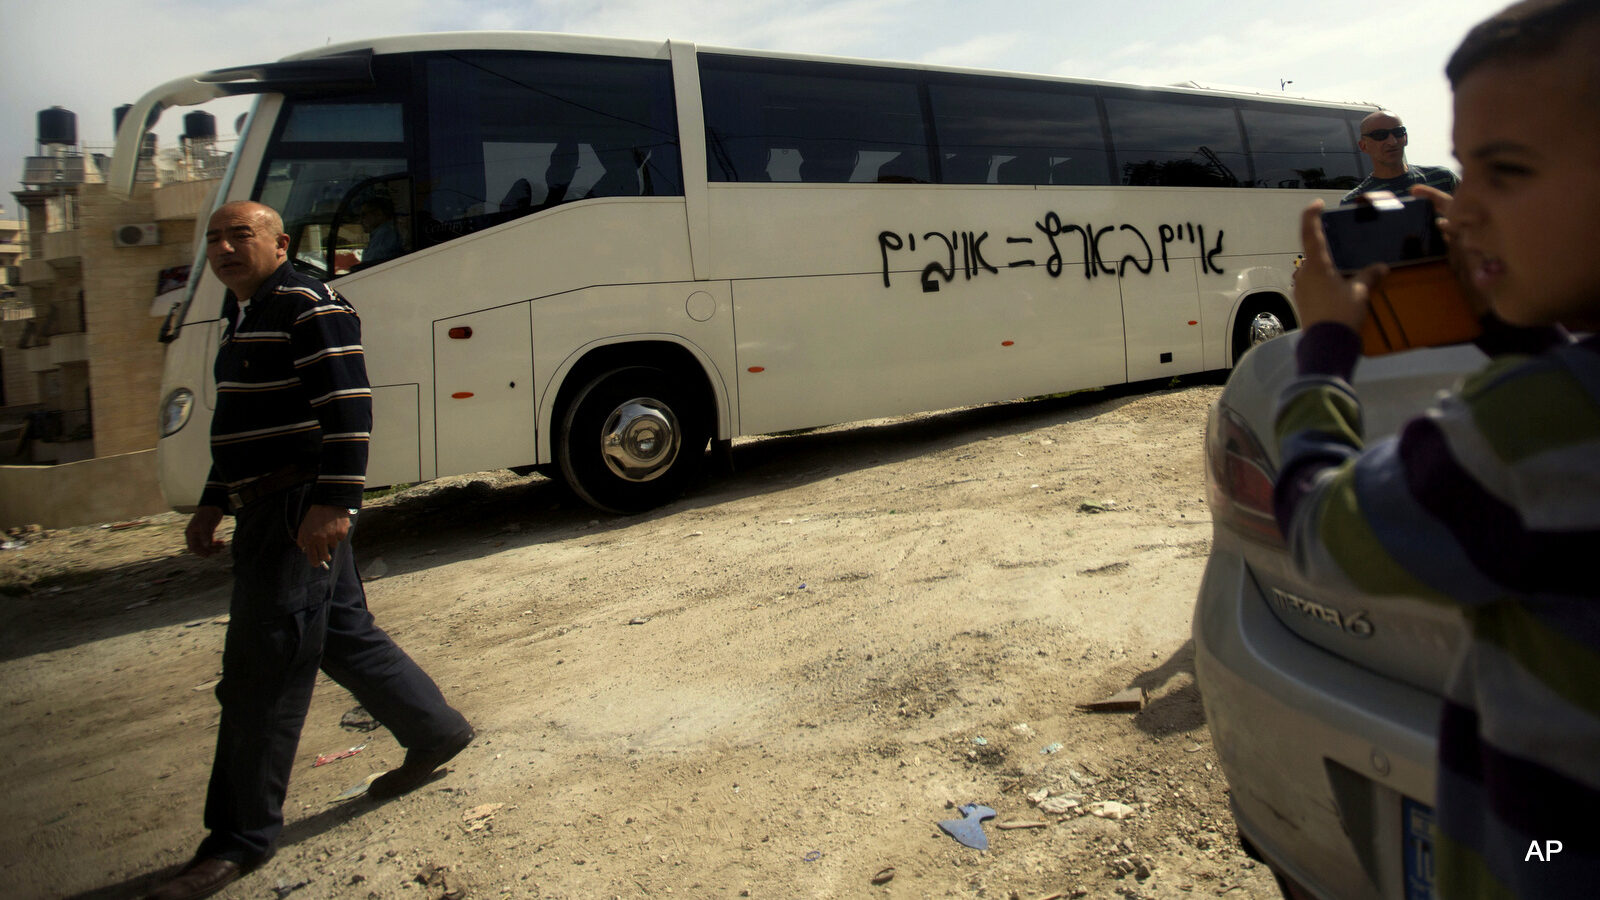 A Palestinian boy takes a photo of graffiti with Hebrew that reads "non-Jews in Israel equals enemies," on a bus in an Arab neighborhood in Jerusalem, Monday, March 24, 2014. Israeli police say vandals have slashed car tires and sprayed a bus with hate graffiti in a predominantly Arab neighborhood in Jerusalem.